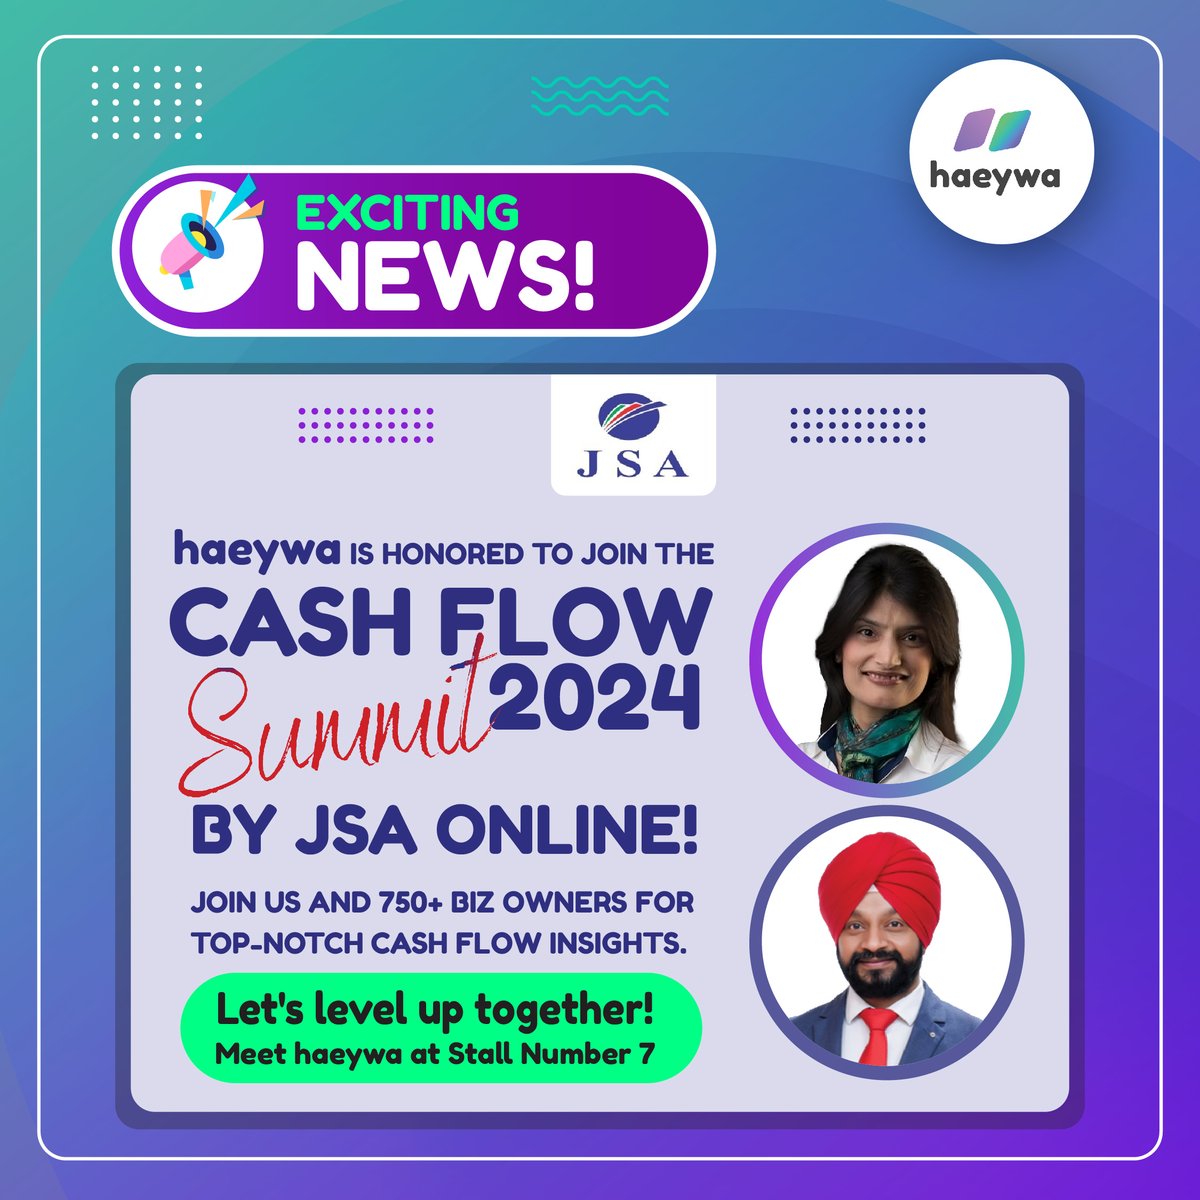 We're thrilled to announce that haeywa has been invited to the Cash Flow Summit 2024 by JSA Online! Get ready for a game-changing experience.
Learn more about haeywa at stall number 7.

To Register: bit.ly/Shilpa-CashFlo…

#CashFlowSummit2024 #JSAOnline  #haeywa